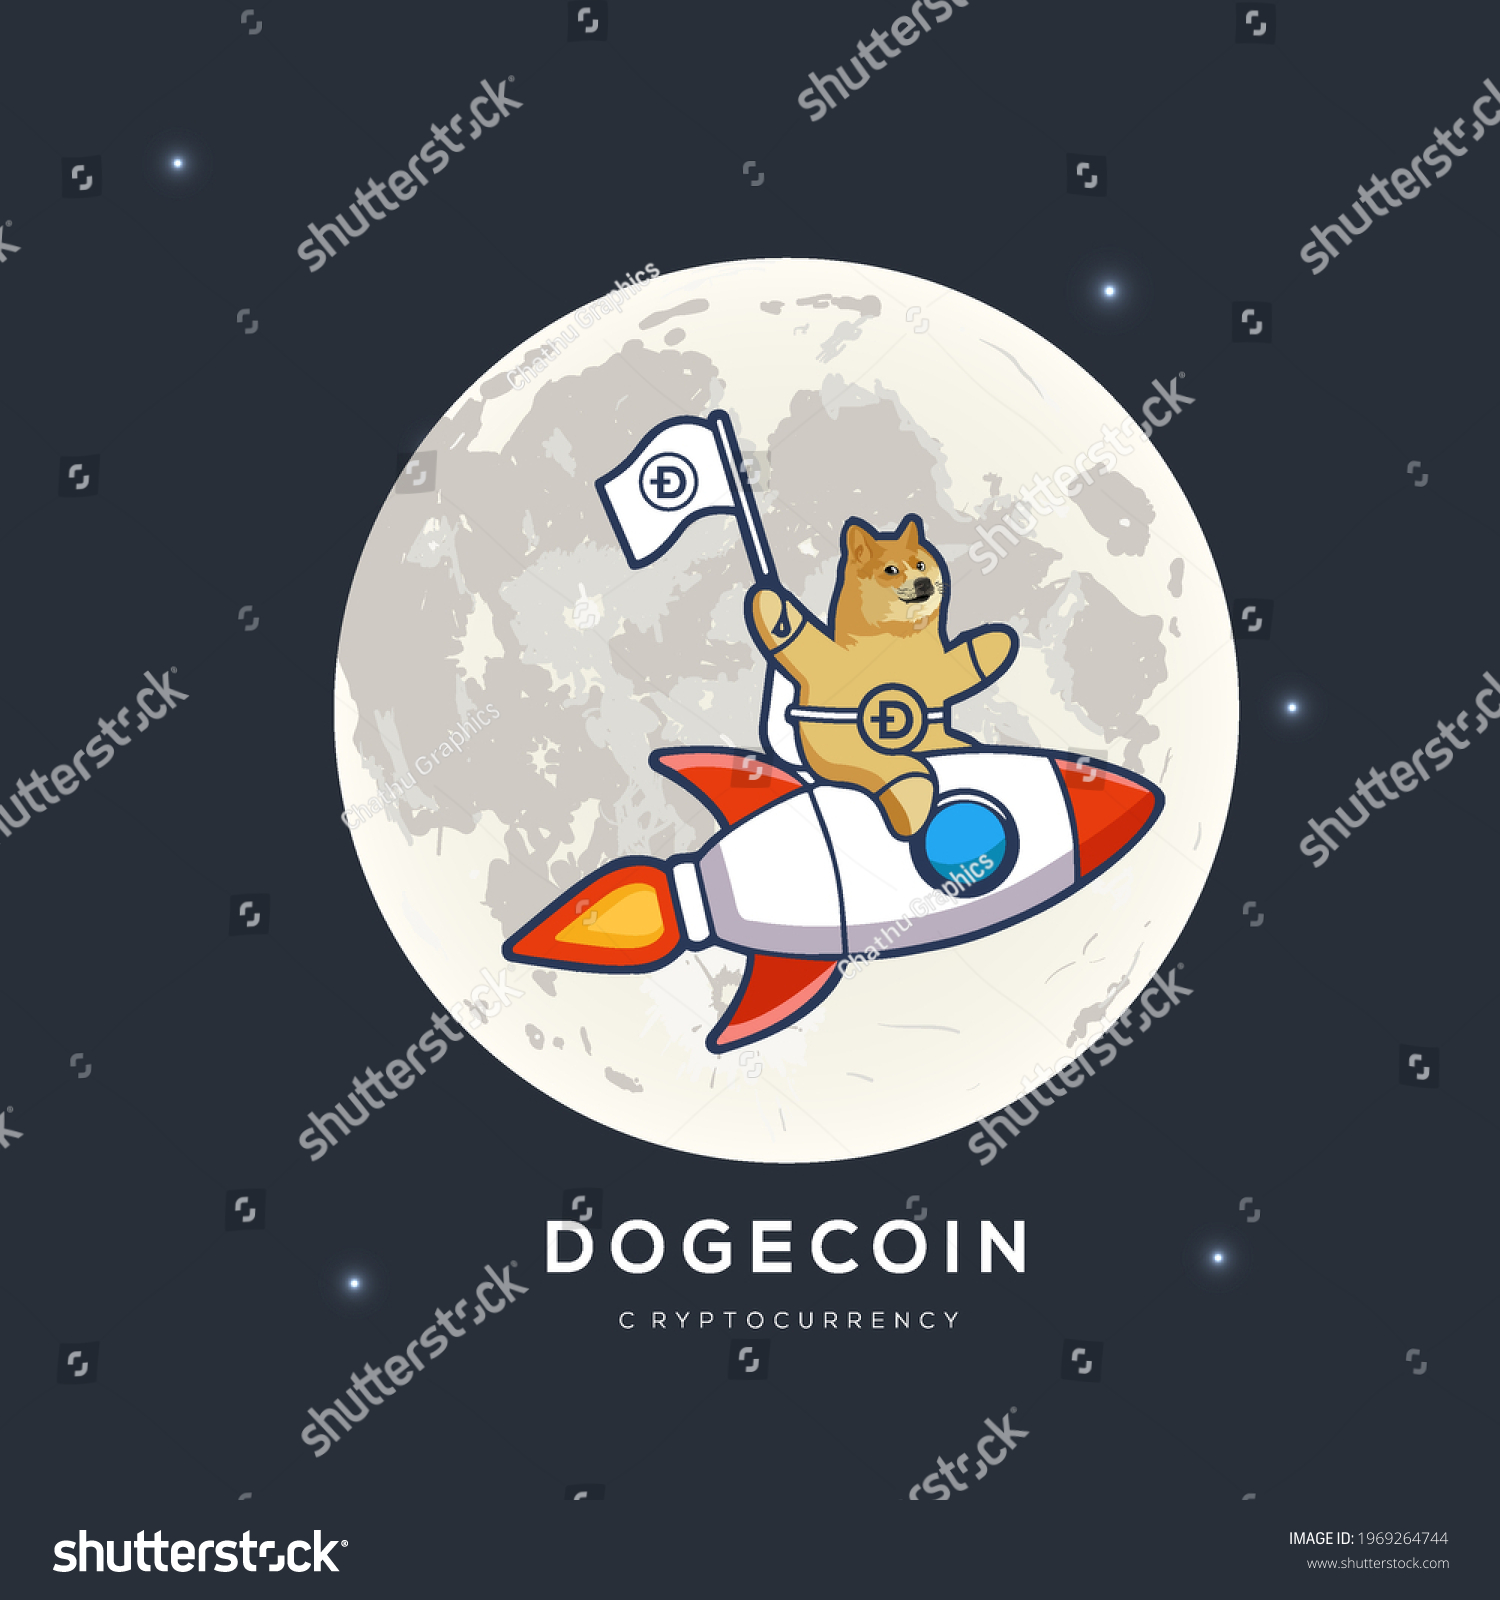 SVG of dogecoin going to the moon, cryptocurrency market, shiba inu meme, original vector illustration svg